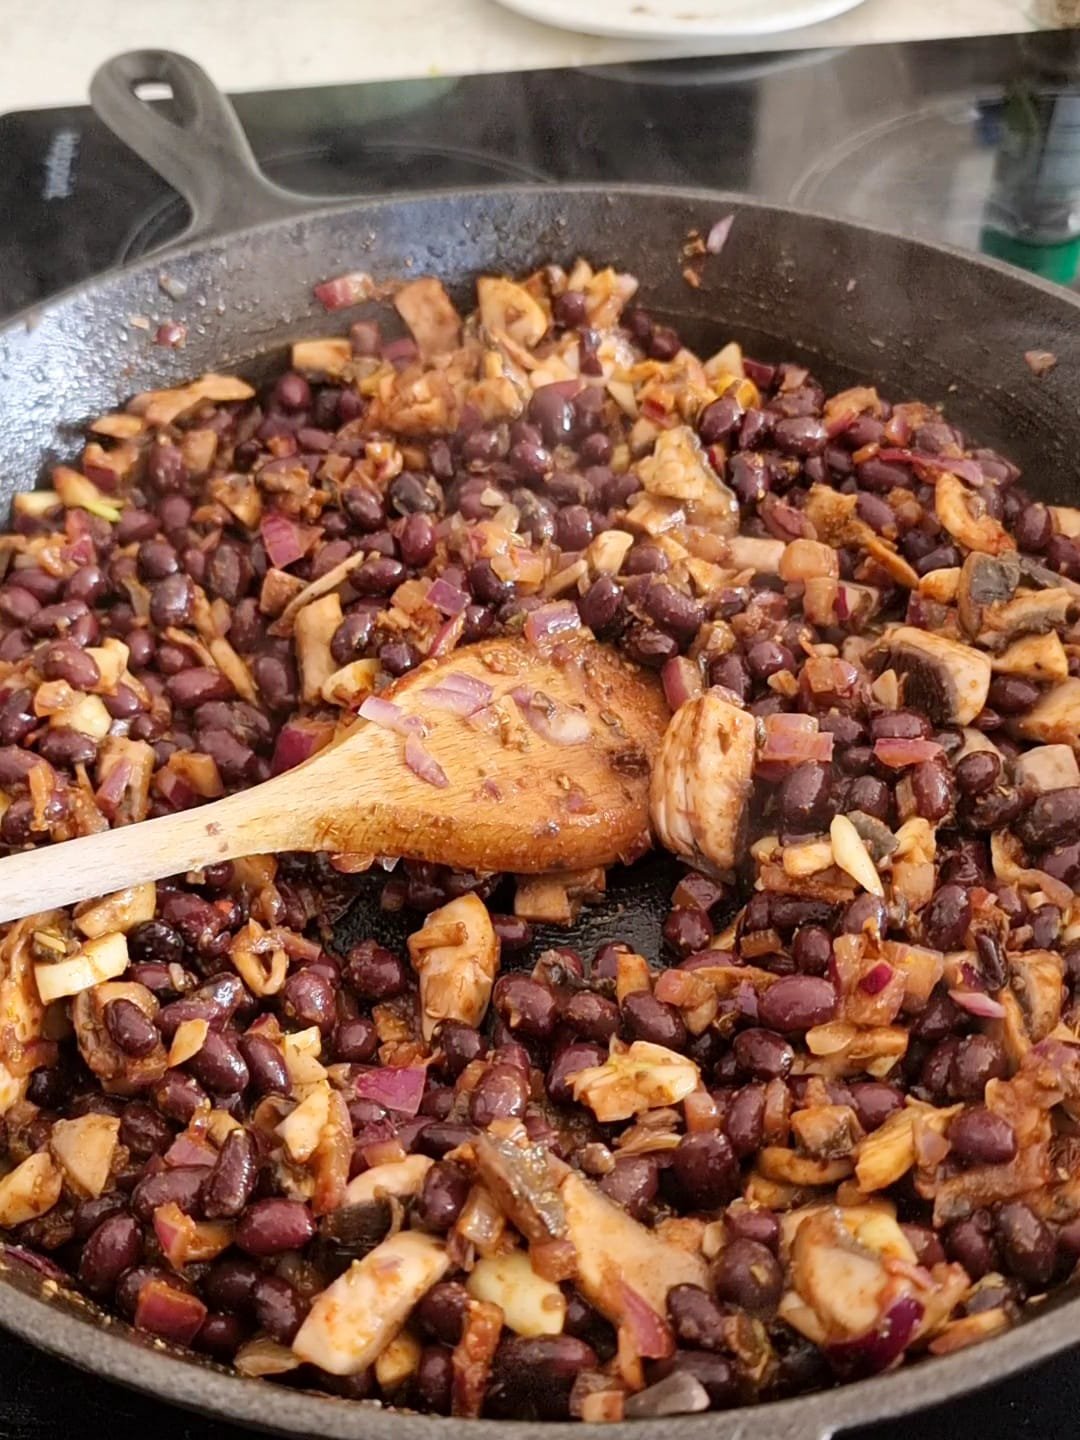 Drain your black beans, add to the mixture and mix well.